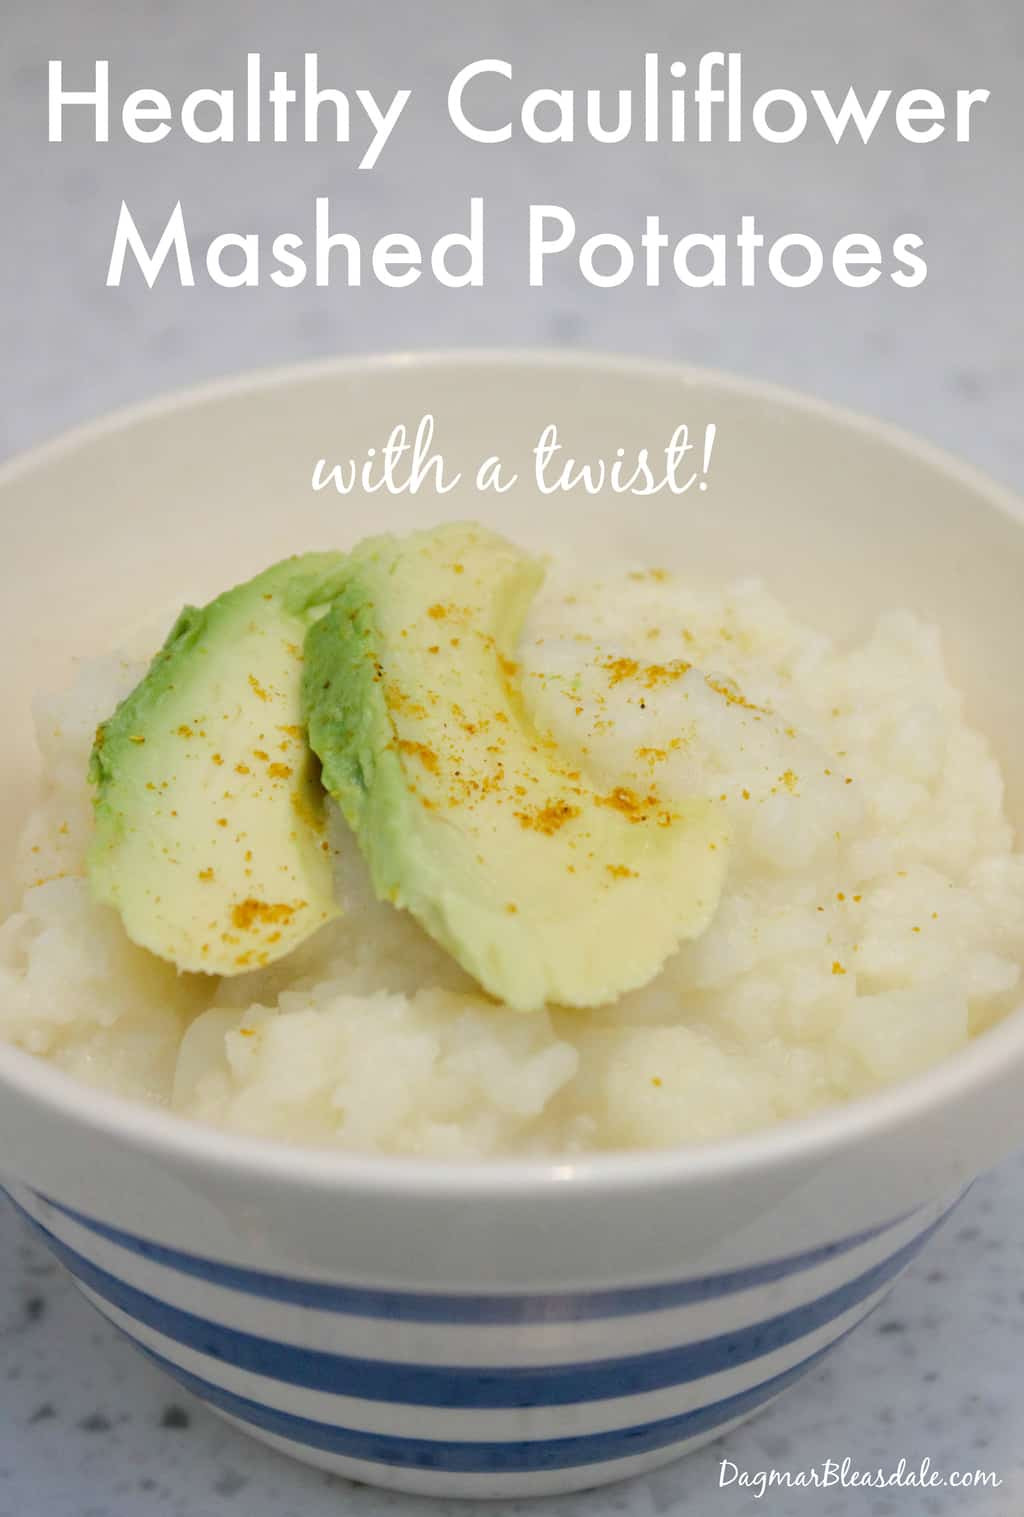 Are Mashed Potatoes Healthy
 Healthy Cauliflower Mashed Potatoes Recipe With a Twist